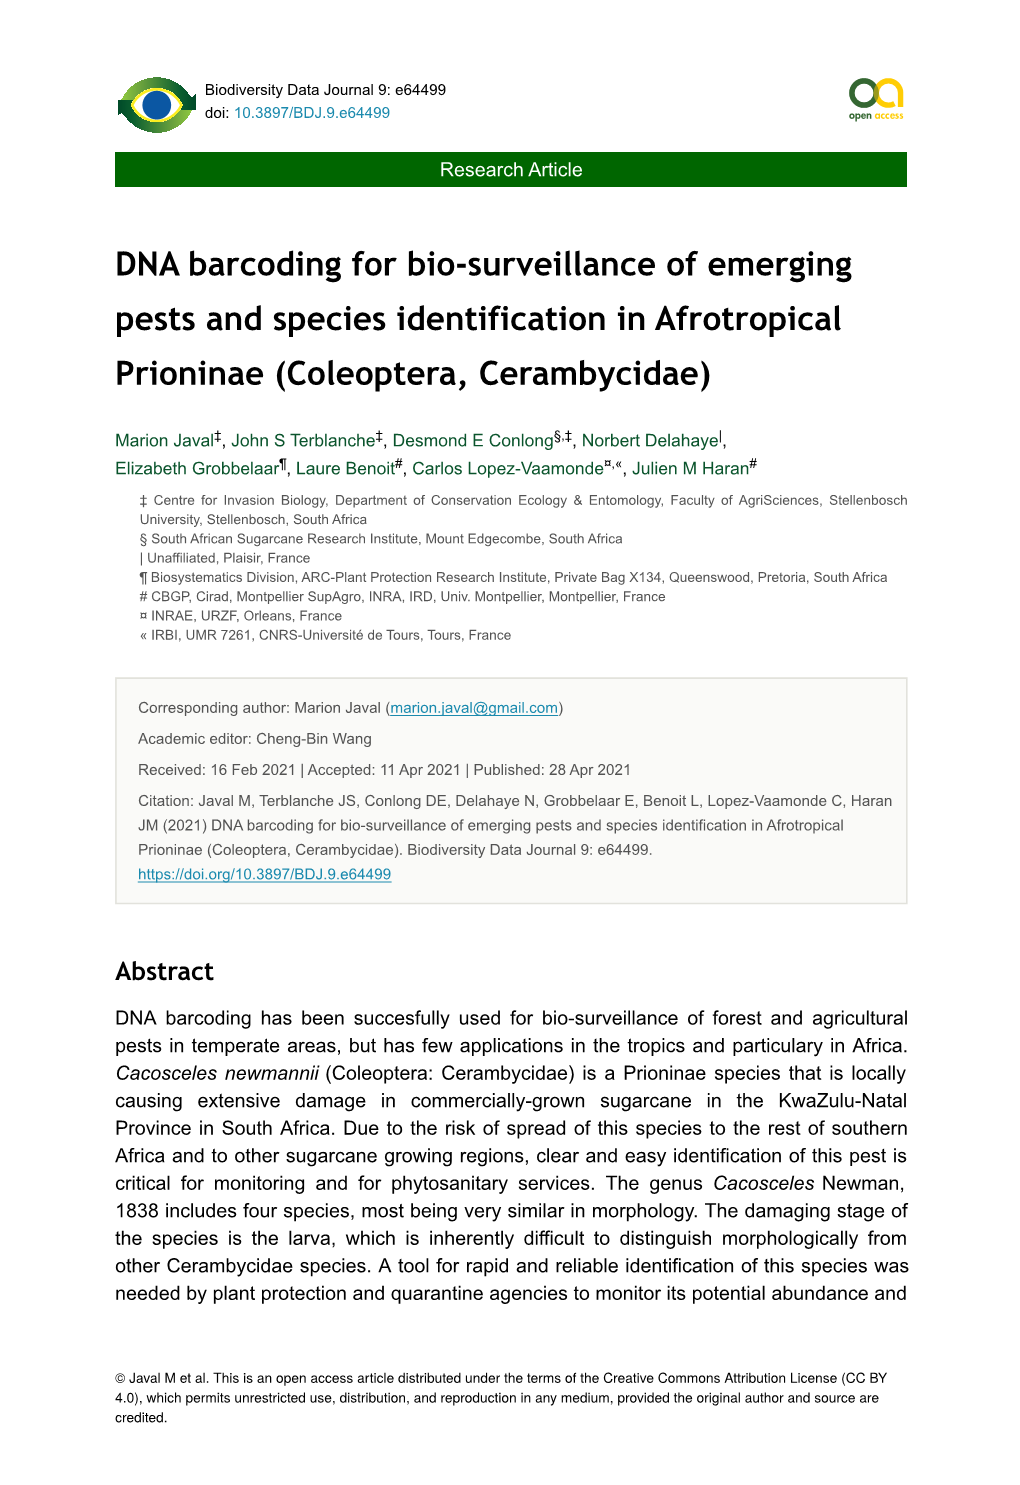 DNA Barcoding for Bio-Surveillance of Emerging Pests and Species Identification in Afrotropical Prioninae (Coleoptera, Cerambycidae)